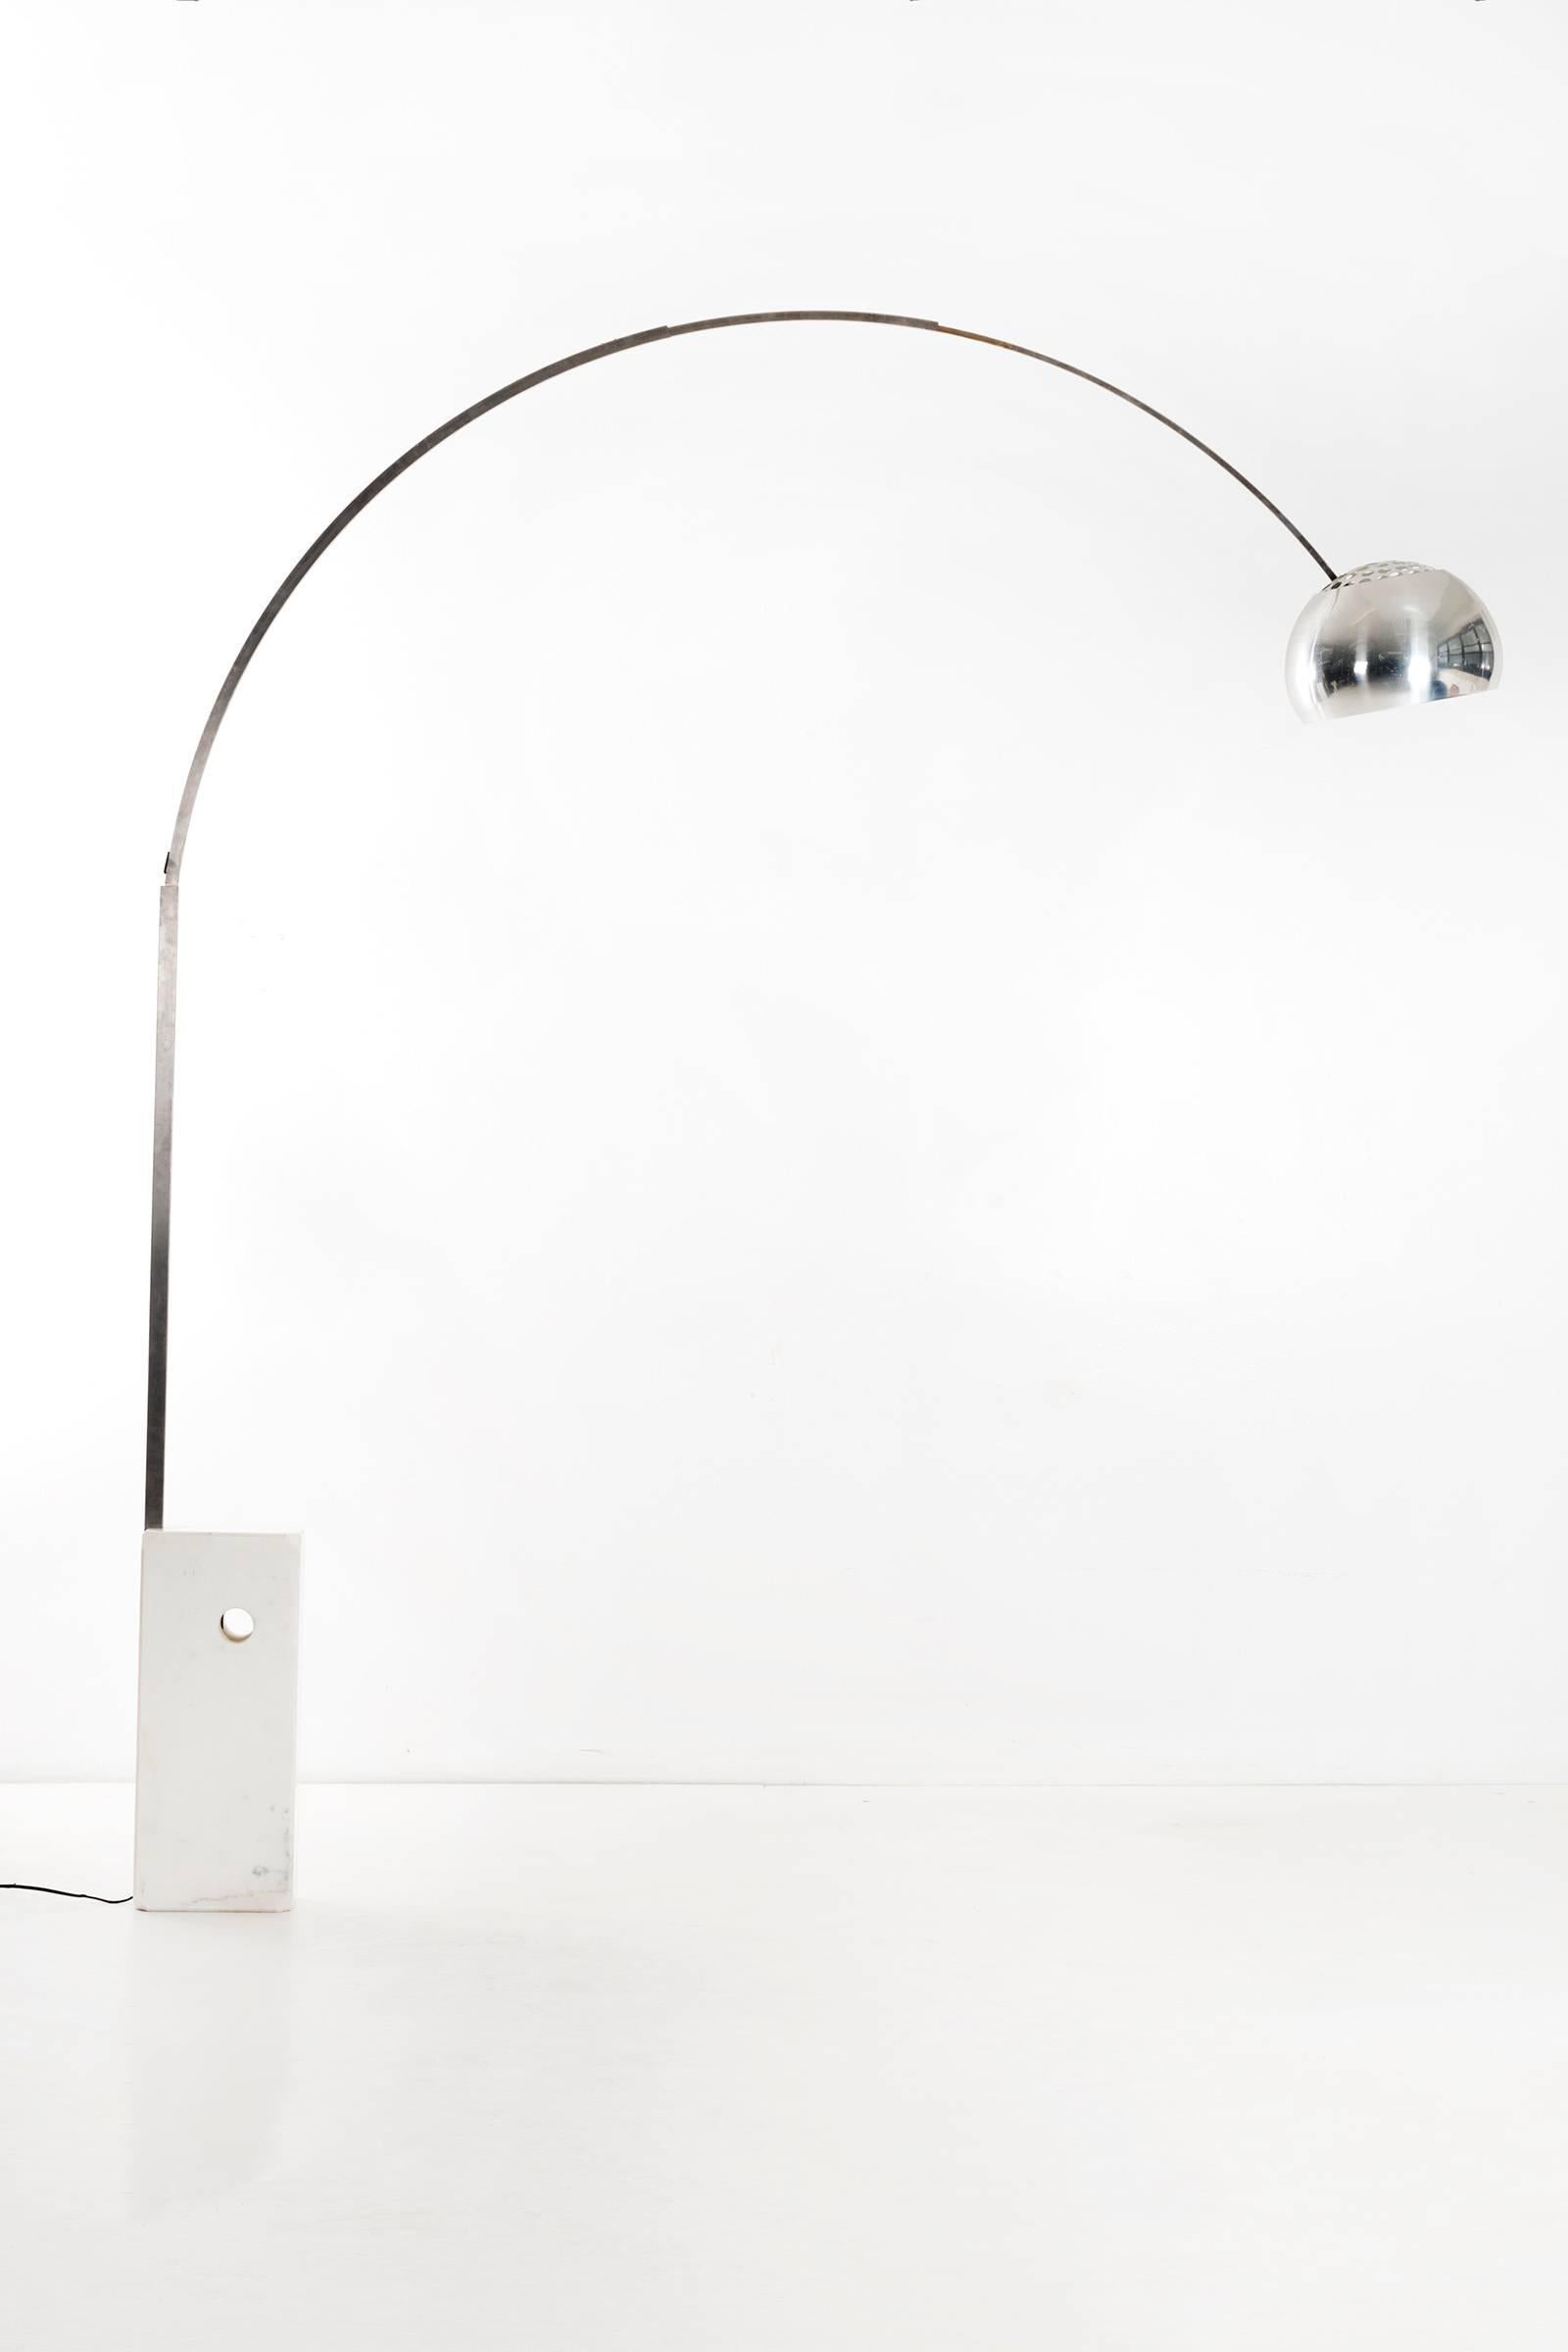 Arco floor lamp (1962). Inspired by a streetlight, the Arco cleverly provides overhead lighting without requiring ceiling suspension, its polished shade extending nearly seven feet to accommodate a dining table or sofa beneath the light source.